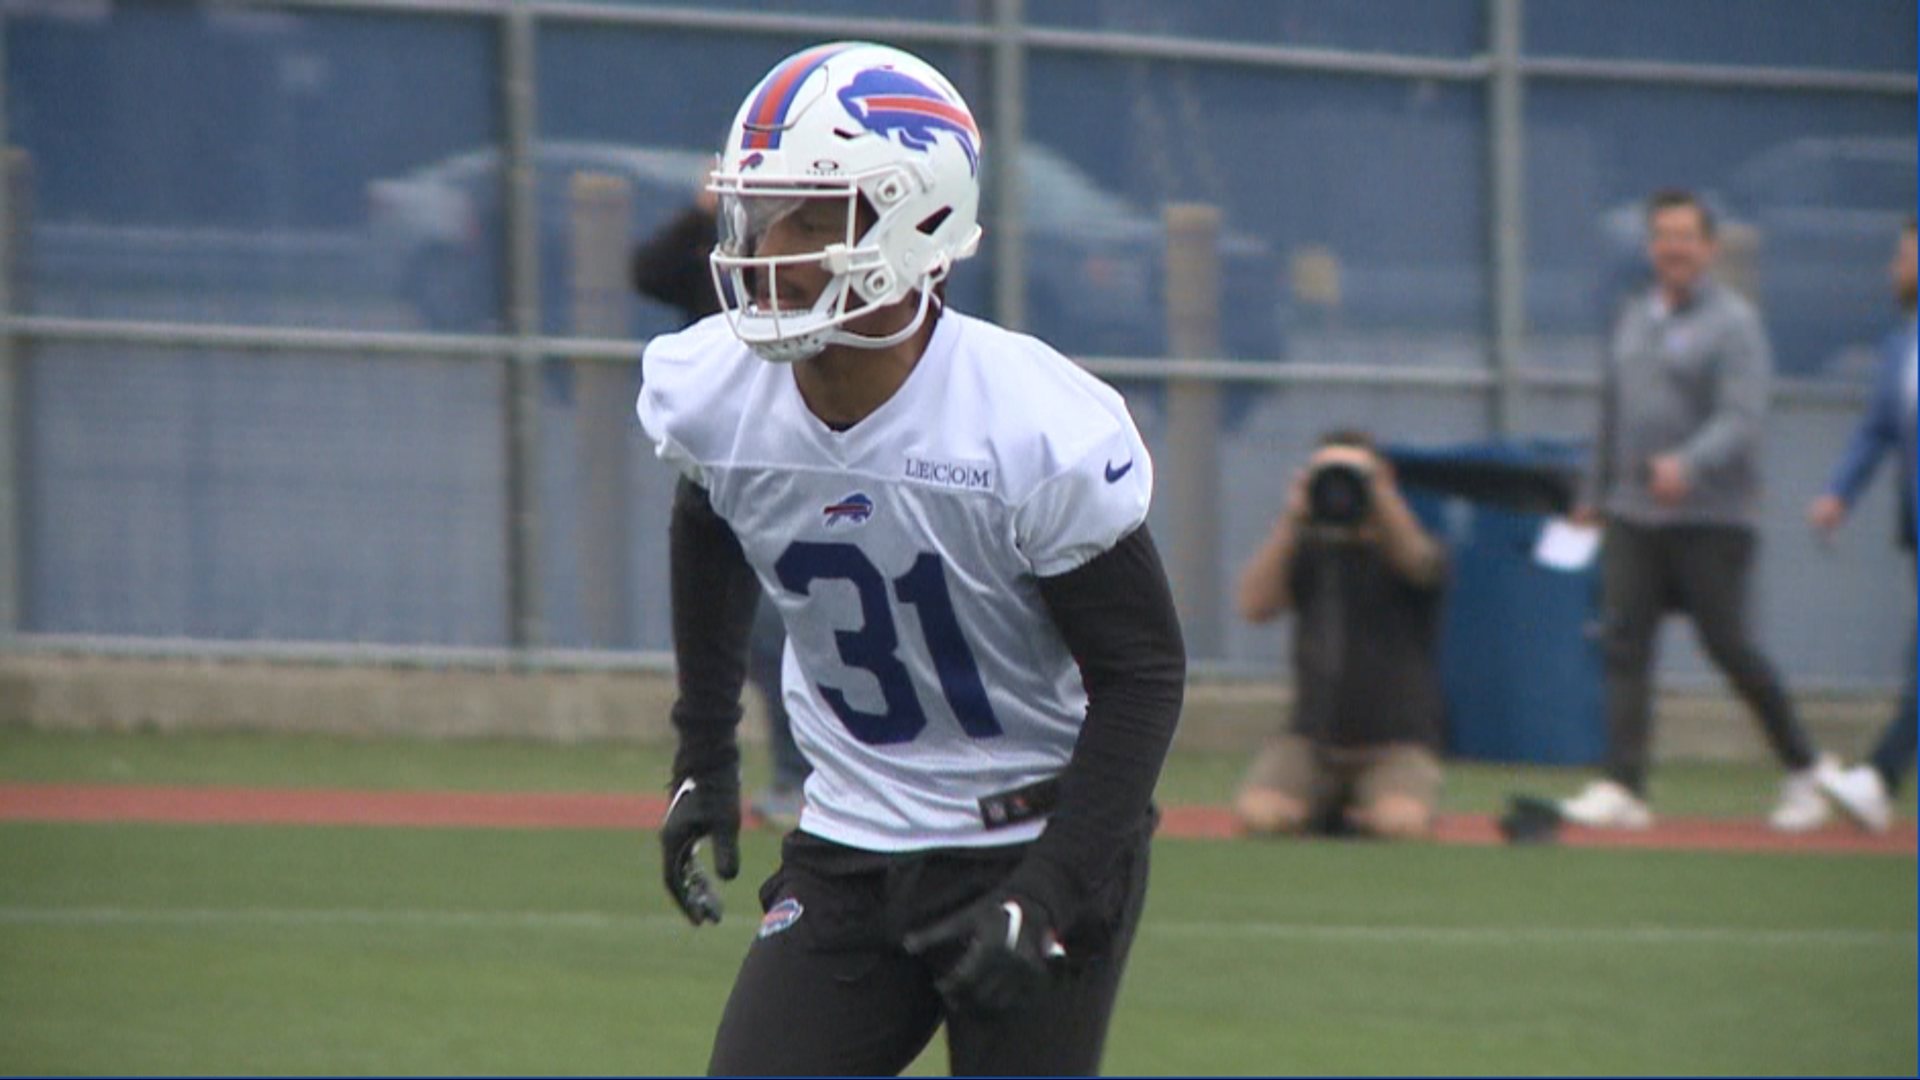 Mandatory minicamp was the first time we saw Rasul Douglas on the practice field for the Buffalo Bills since the end of last season.